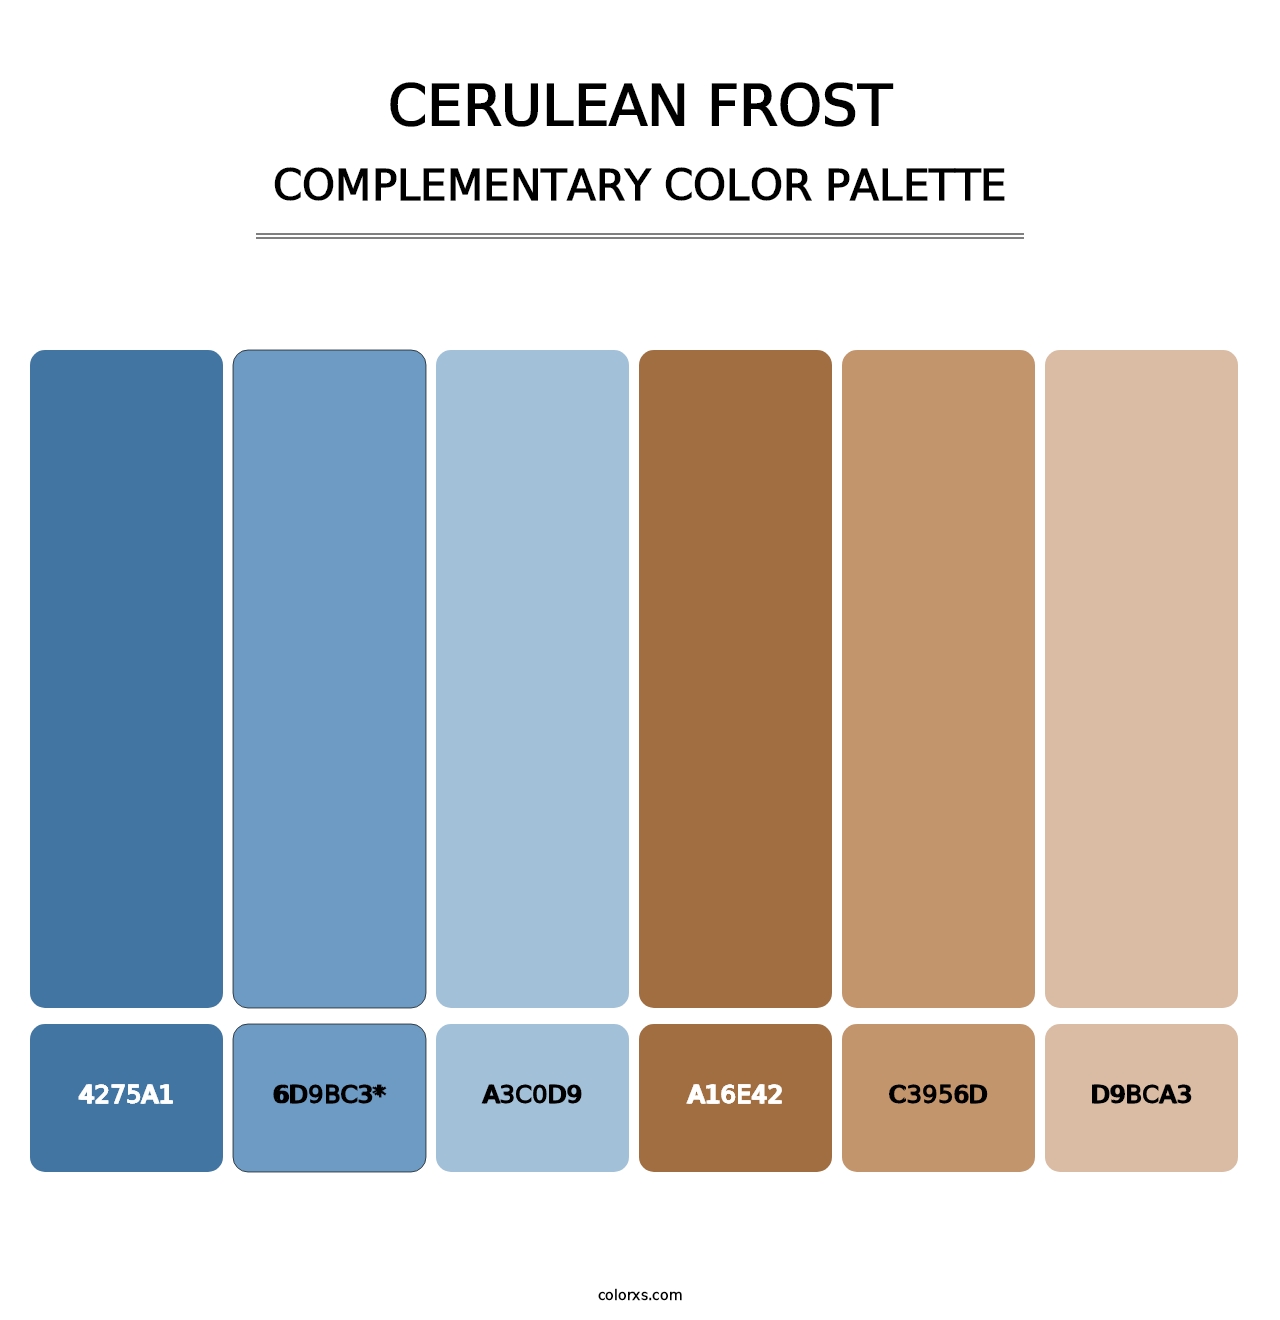 Cerulean Frost - Complementary Color Palette